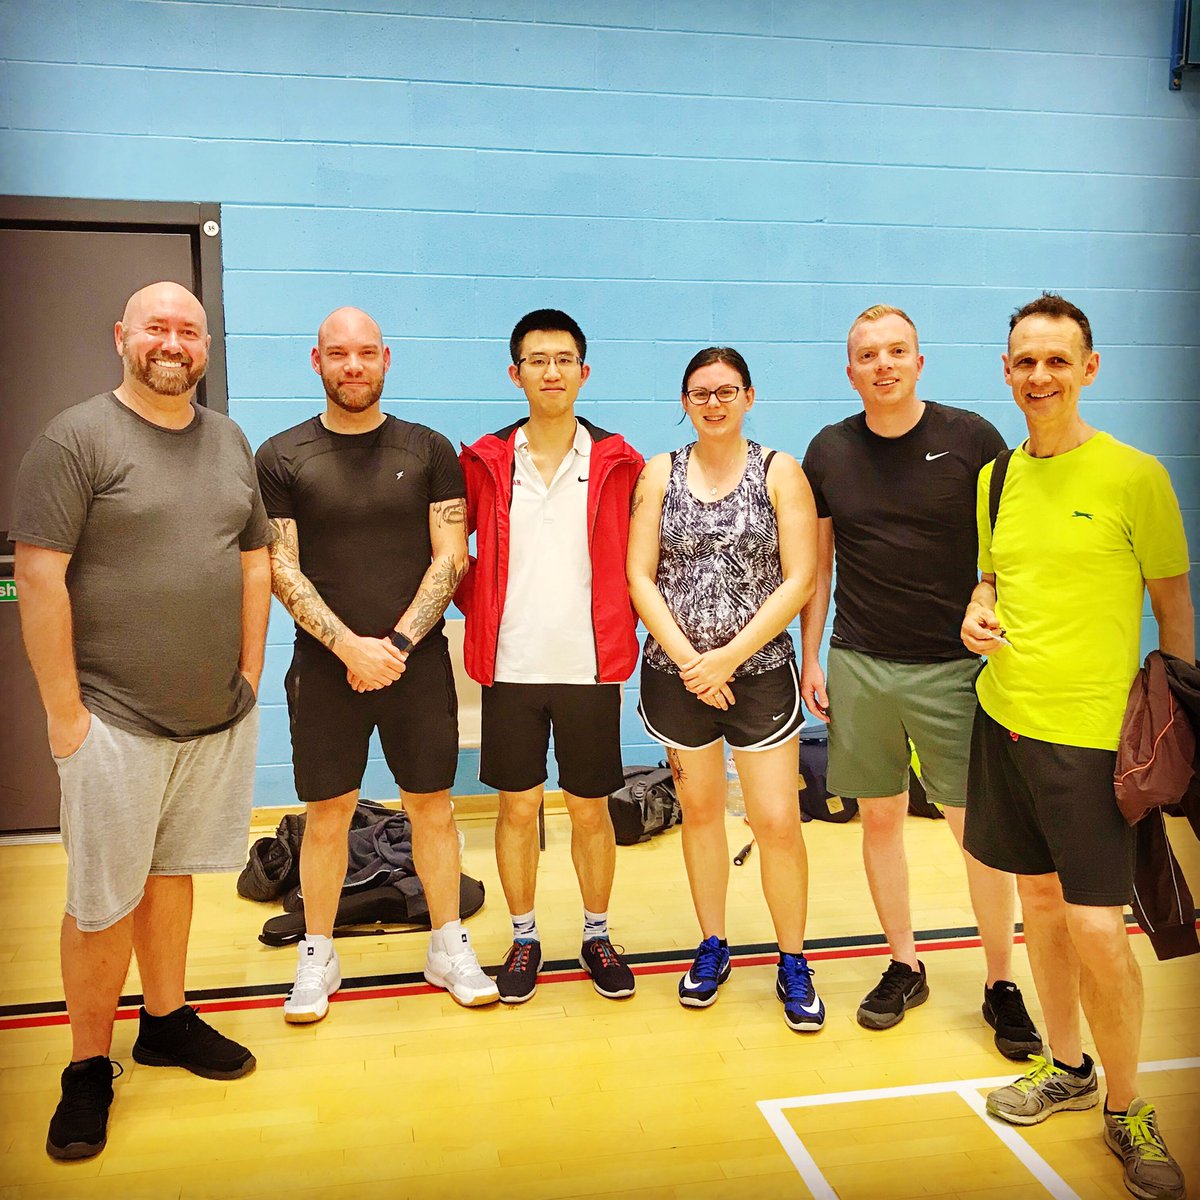 This evenings group of players with #TheBadMittens, #Leeds LGBT+ Inclusive #badminton group - sessions every Monday & Wednesday evening.

Register & book: meetu.ps/c/2Ls2Y/1Z0j3/a 🏸

#ActiveLeeds #LGBTActive #LGBT #InclusiveLeeds #LGBTLeeds #GayLeeds #QueerLeeds #LGBTSport